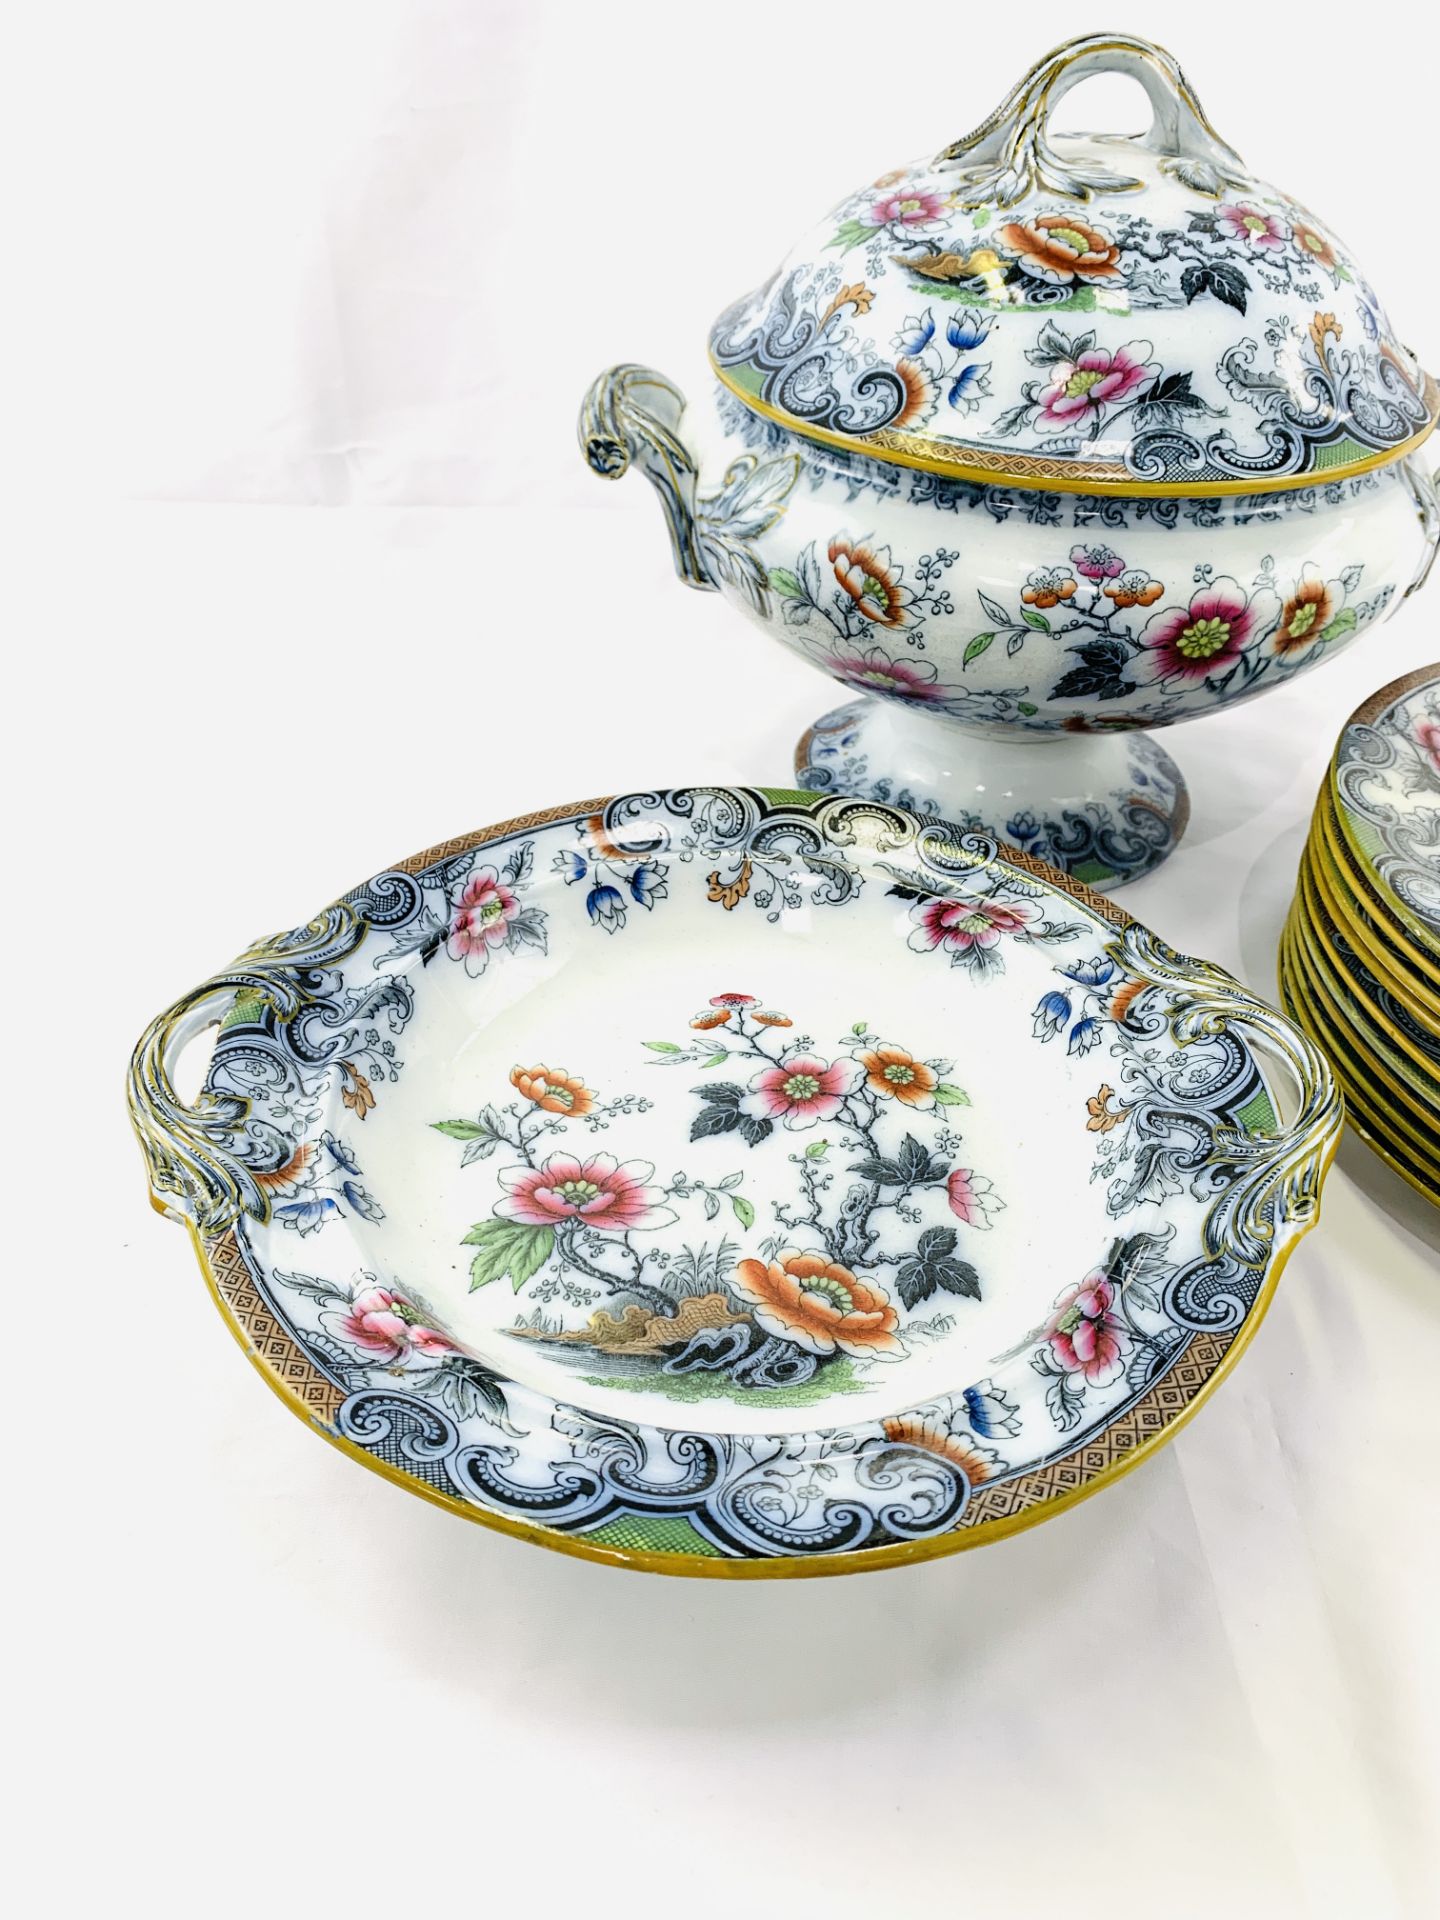 JR and G "Floral" tableware - Image 3 of 4